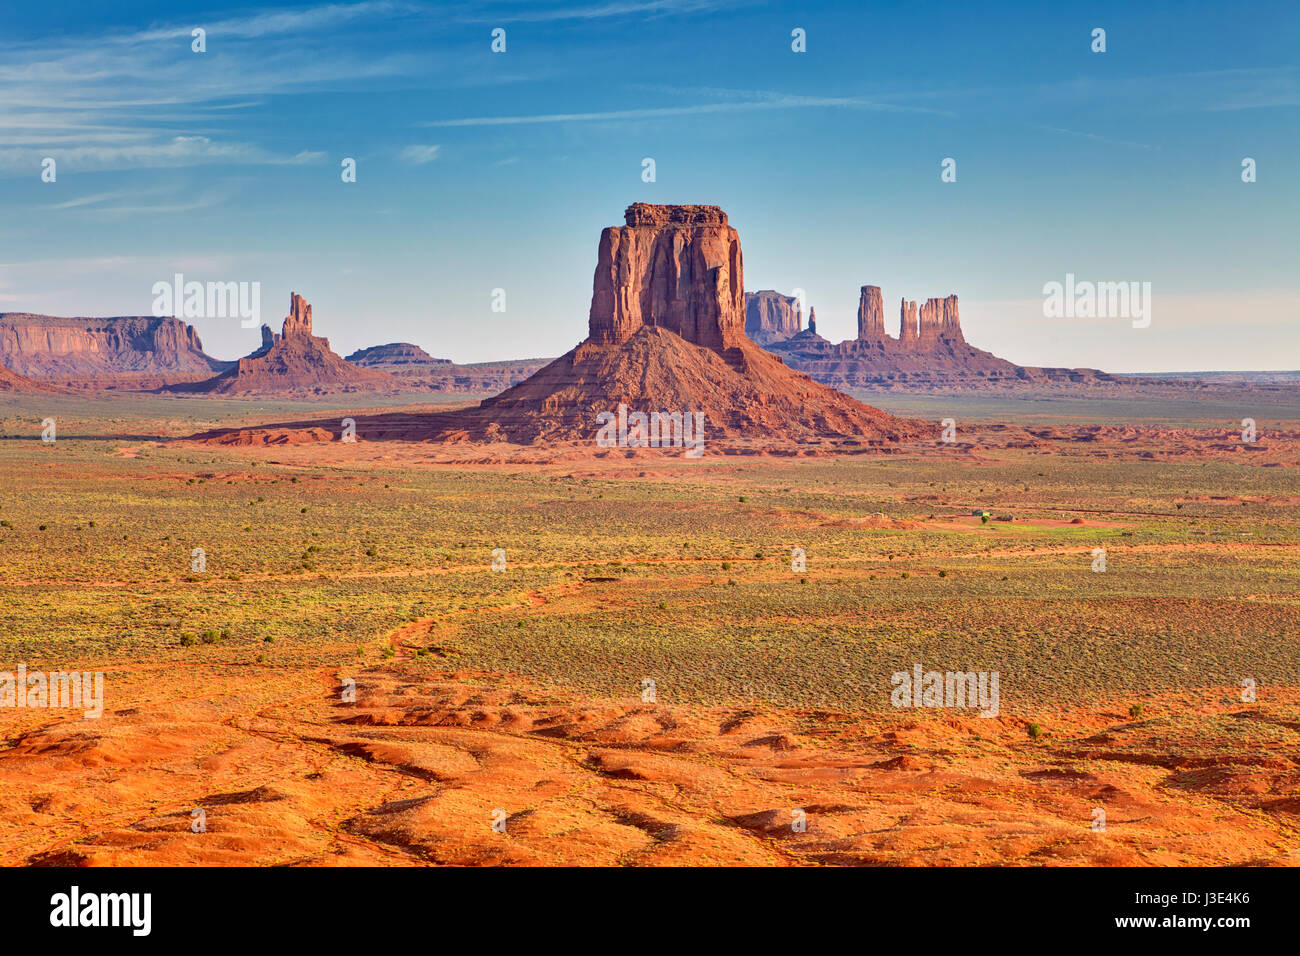 Monument Valley from the Artist's point, Arizona, United States Stock Photo